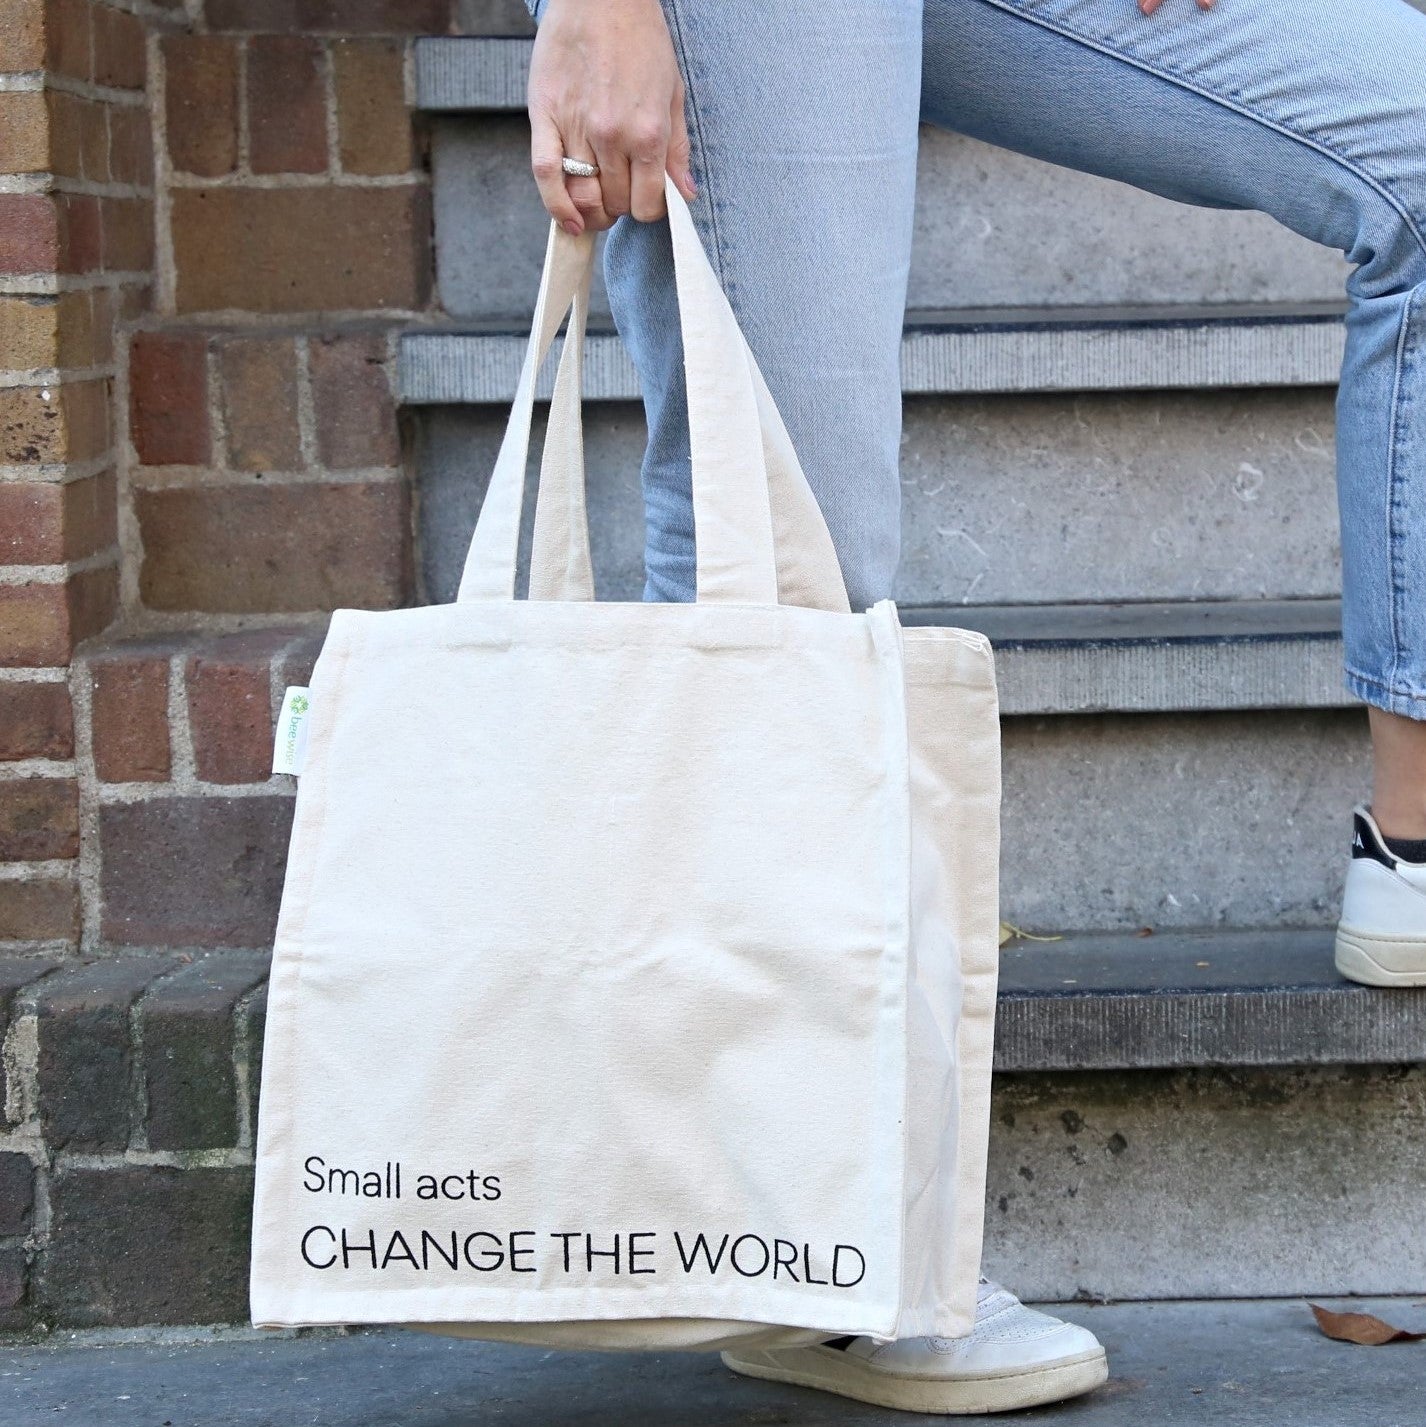 story and about us of beewise amsterdam company showing a grocery bag made in organic cotton